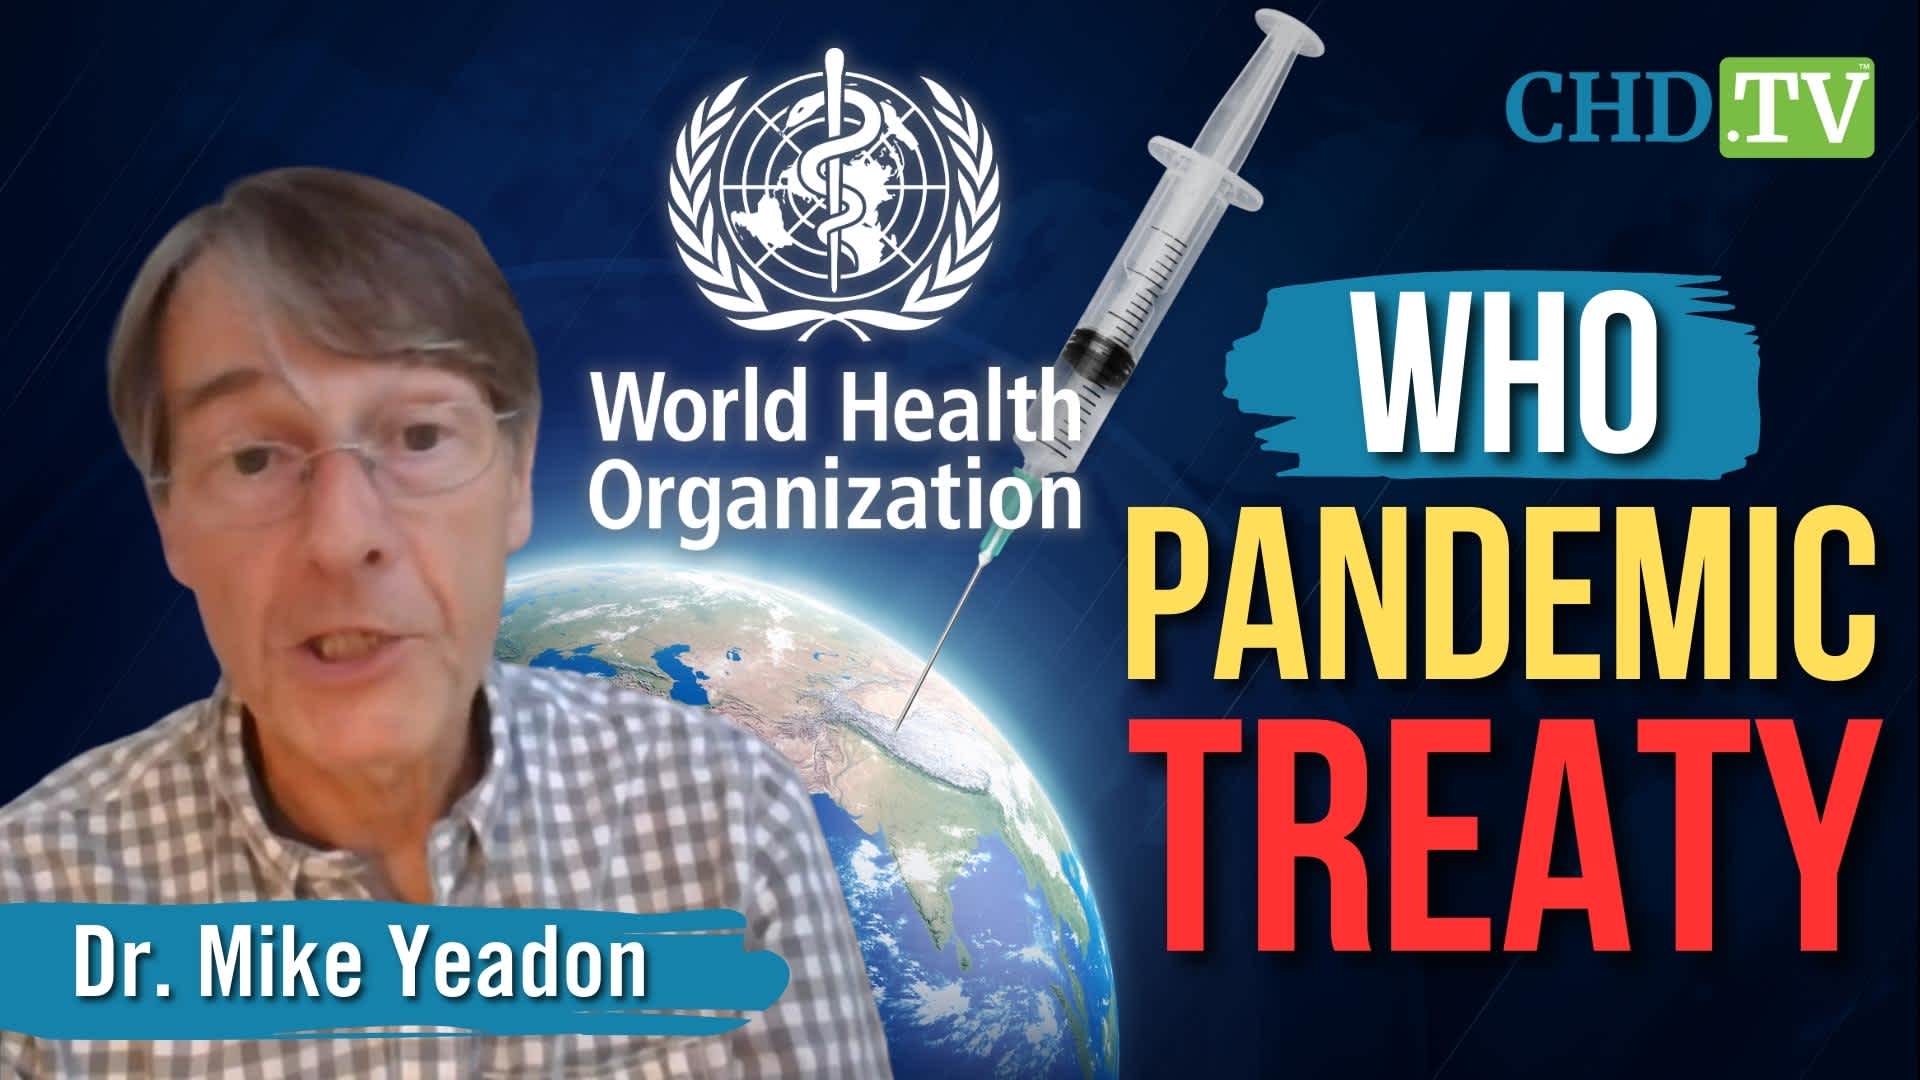 STOP THE TREATY: Dr. Mike Yeadon Issues Grave Warning Against WHO’s Looming Health Dictatorship